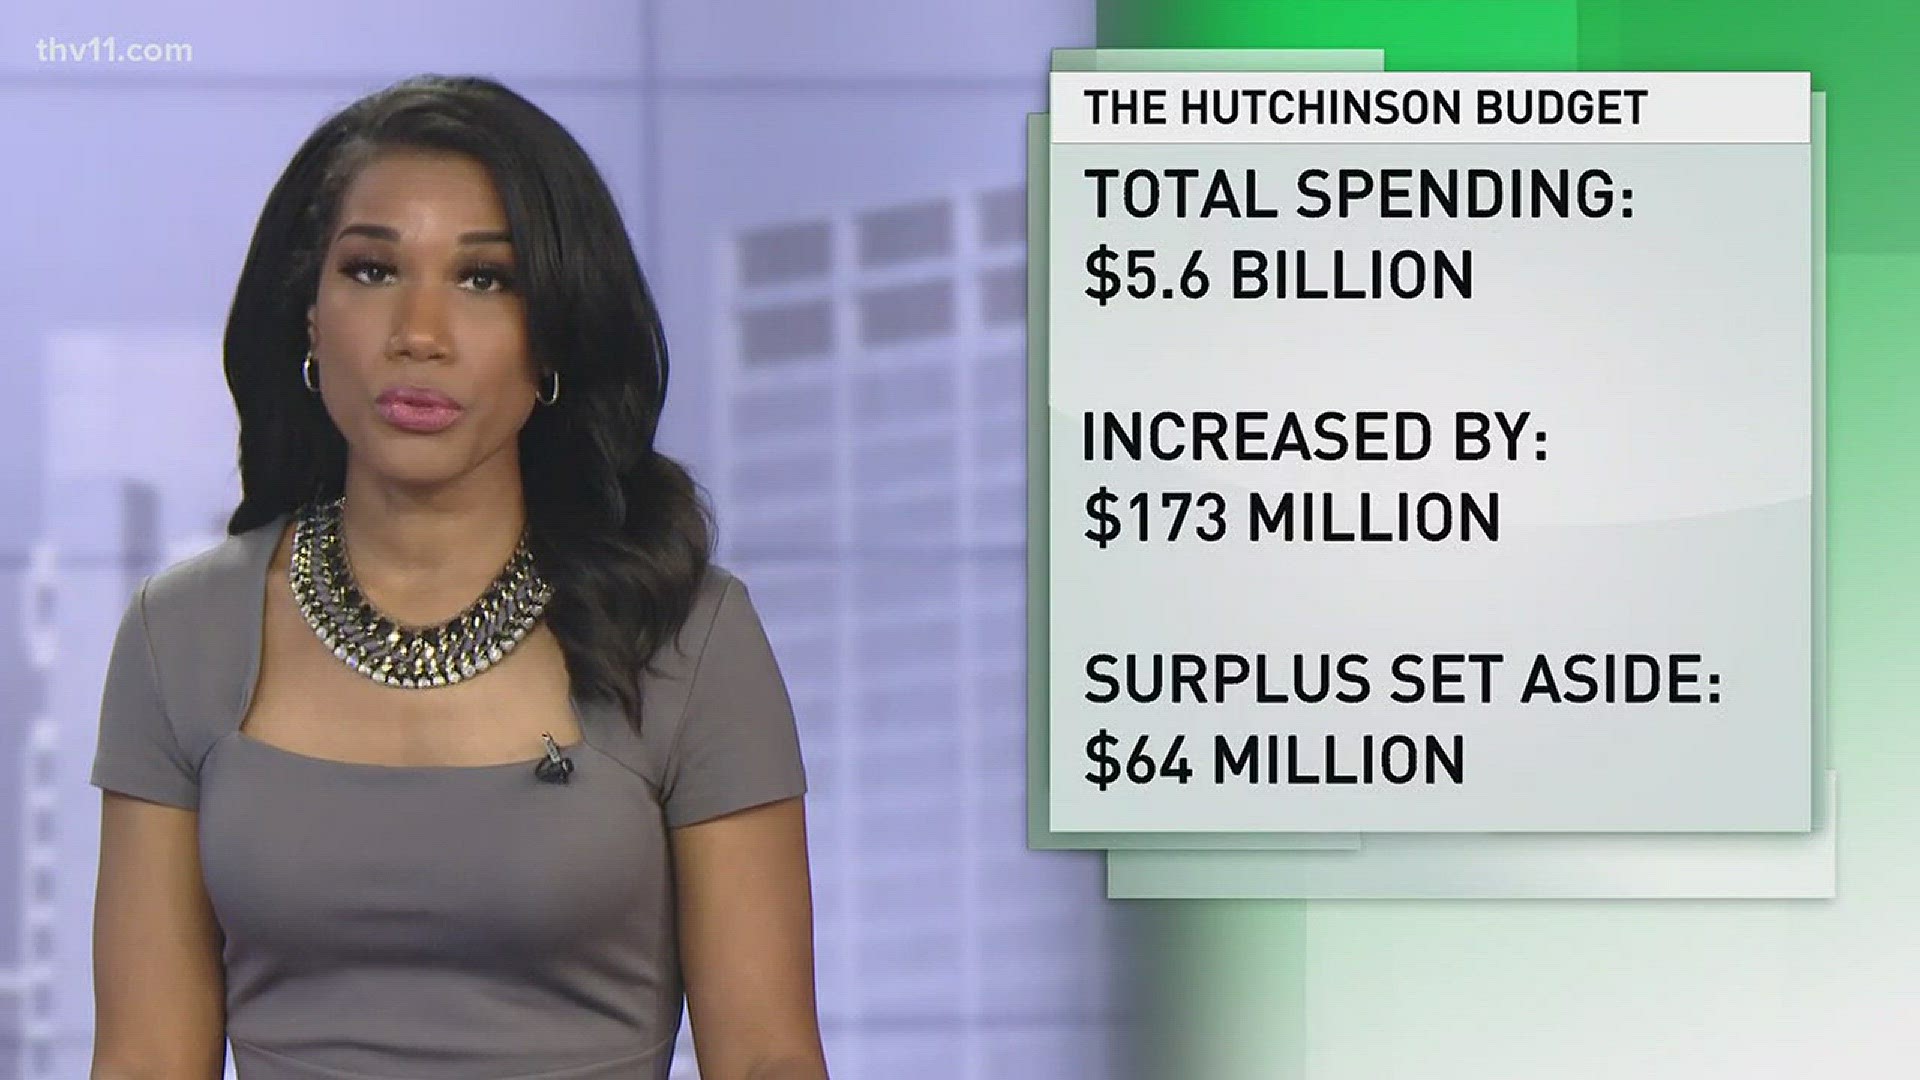 The budget for next year is increased by $173 million, with a surplus of $64 million set aside.